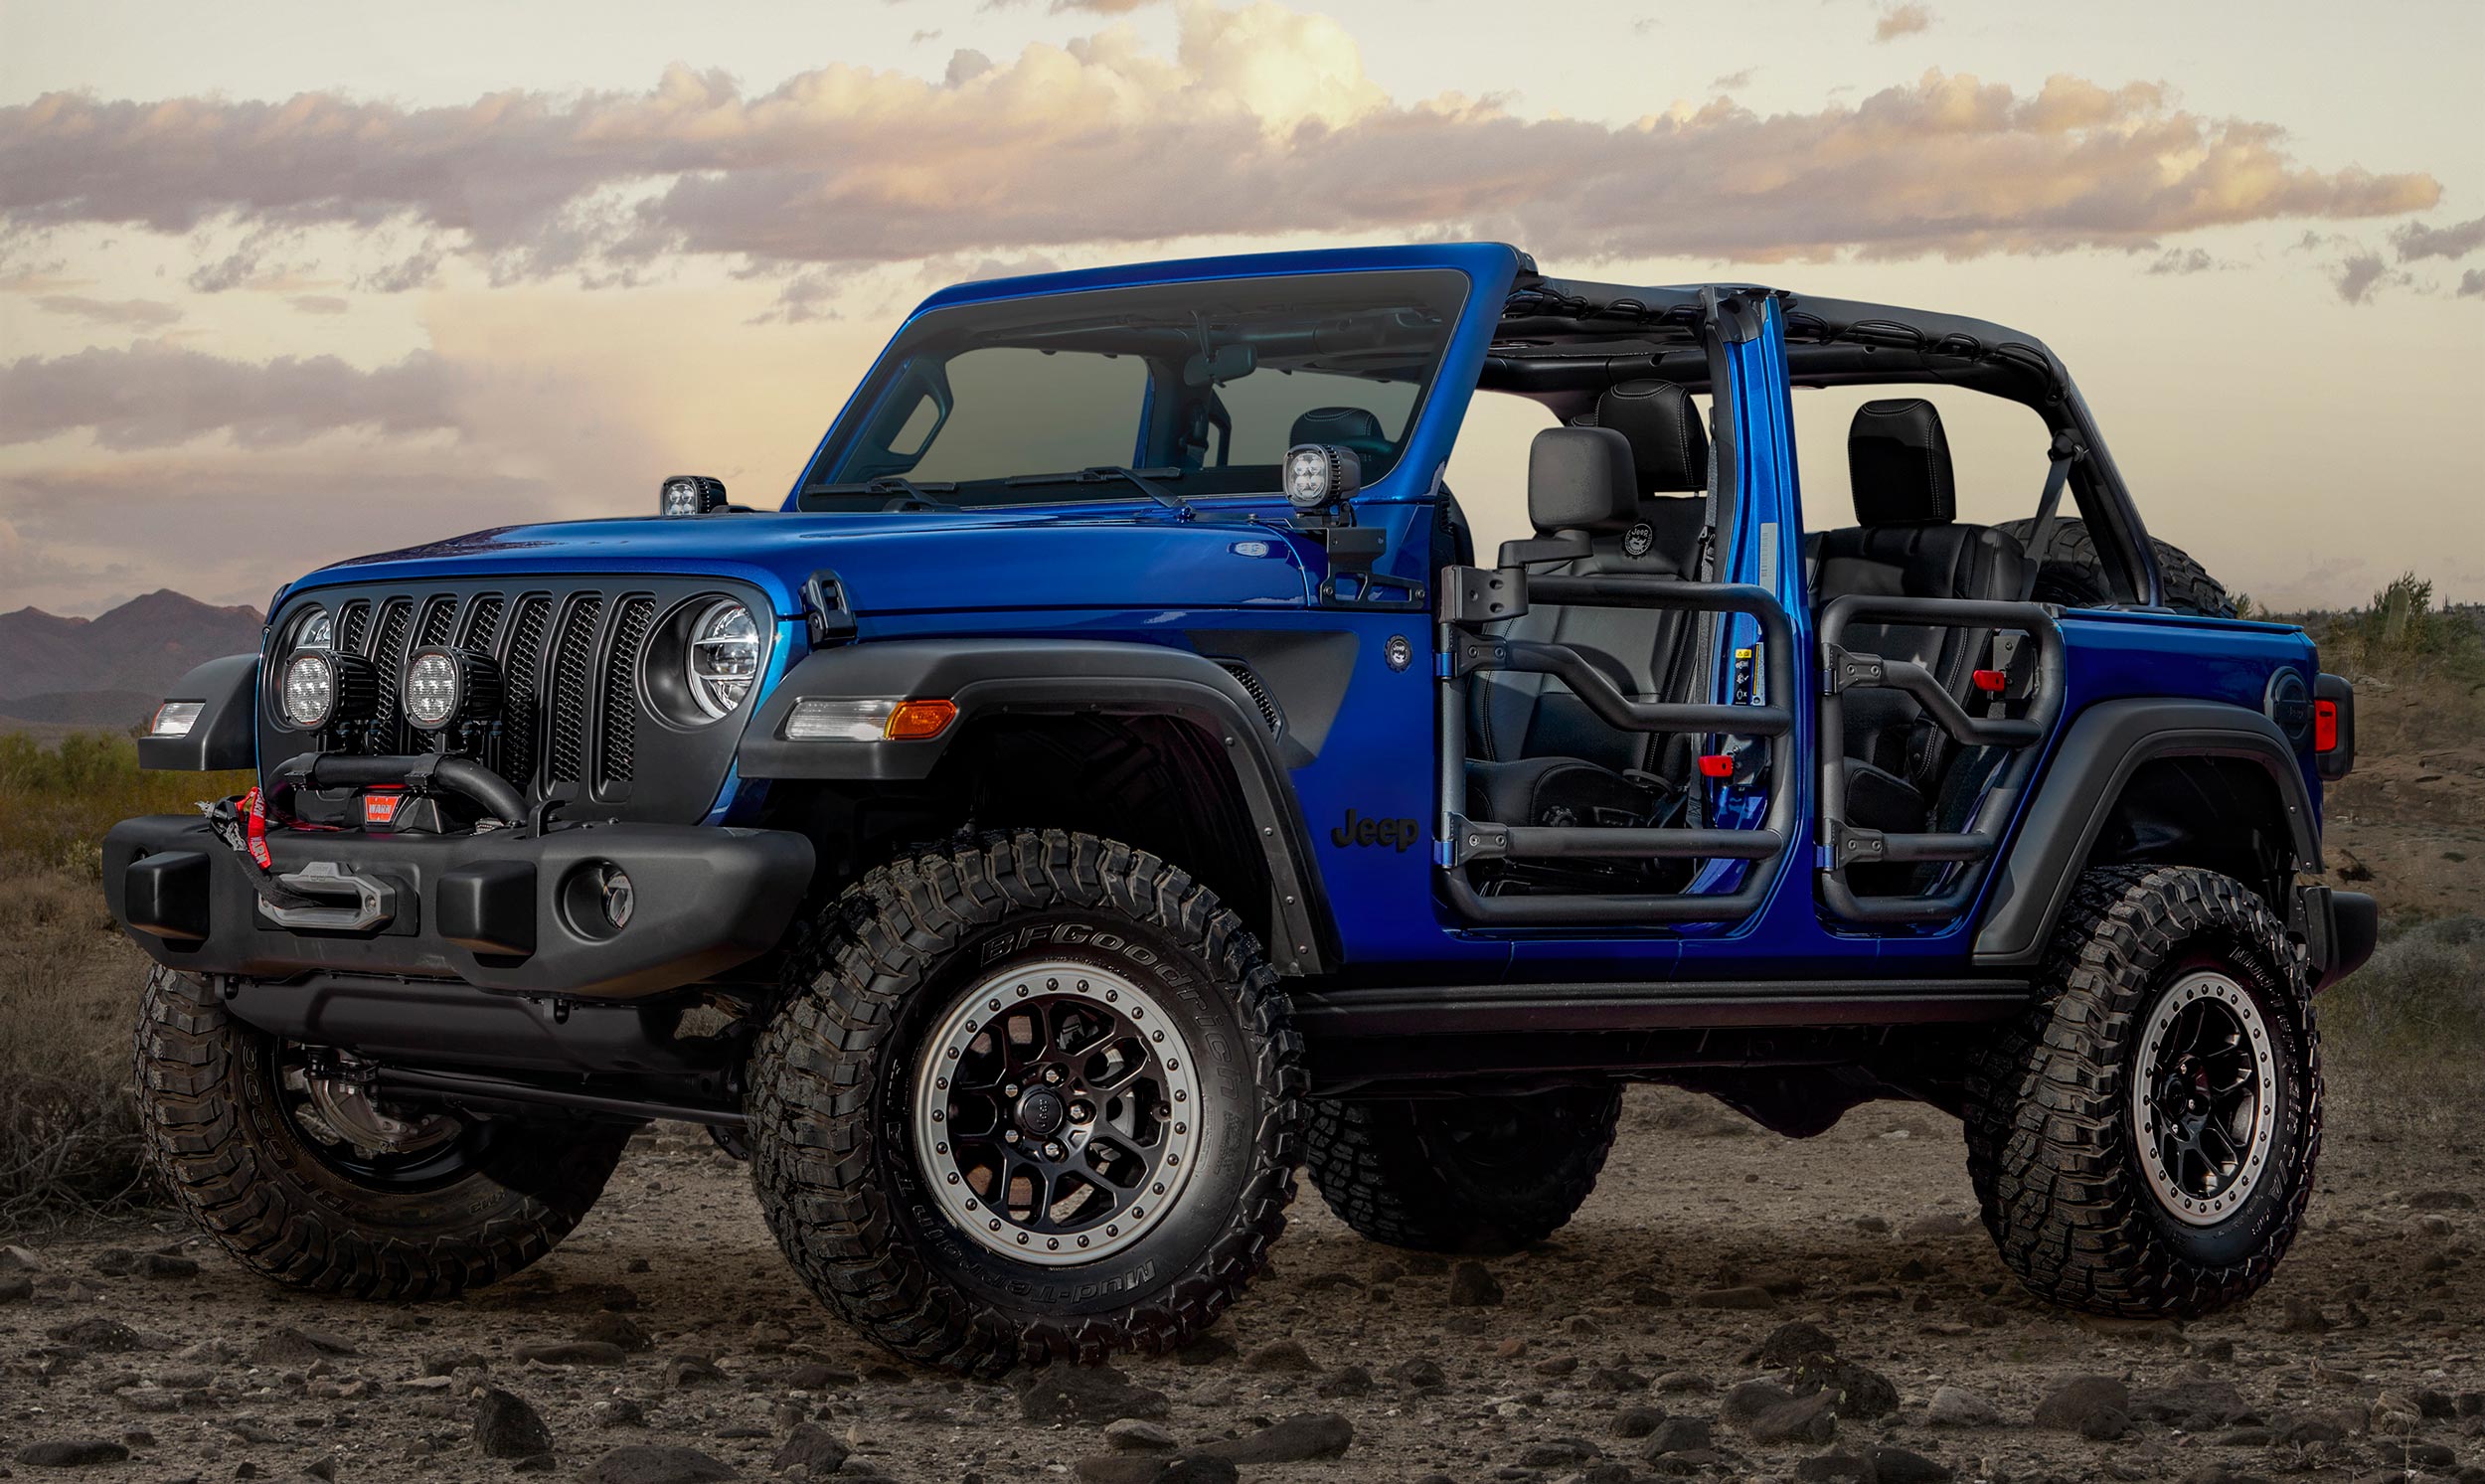 Jeep Wrangler JPP 20 Limited Edition: Accessorized to the Max!